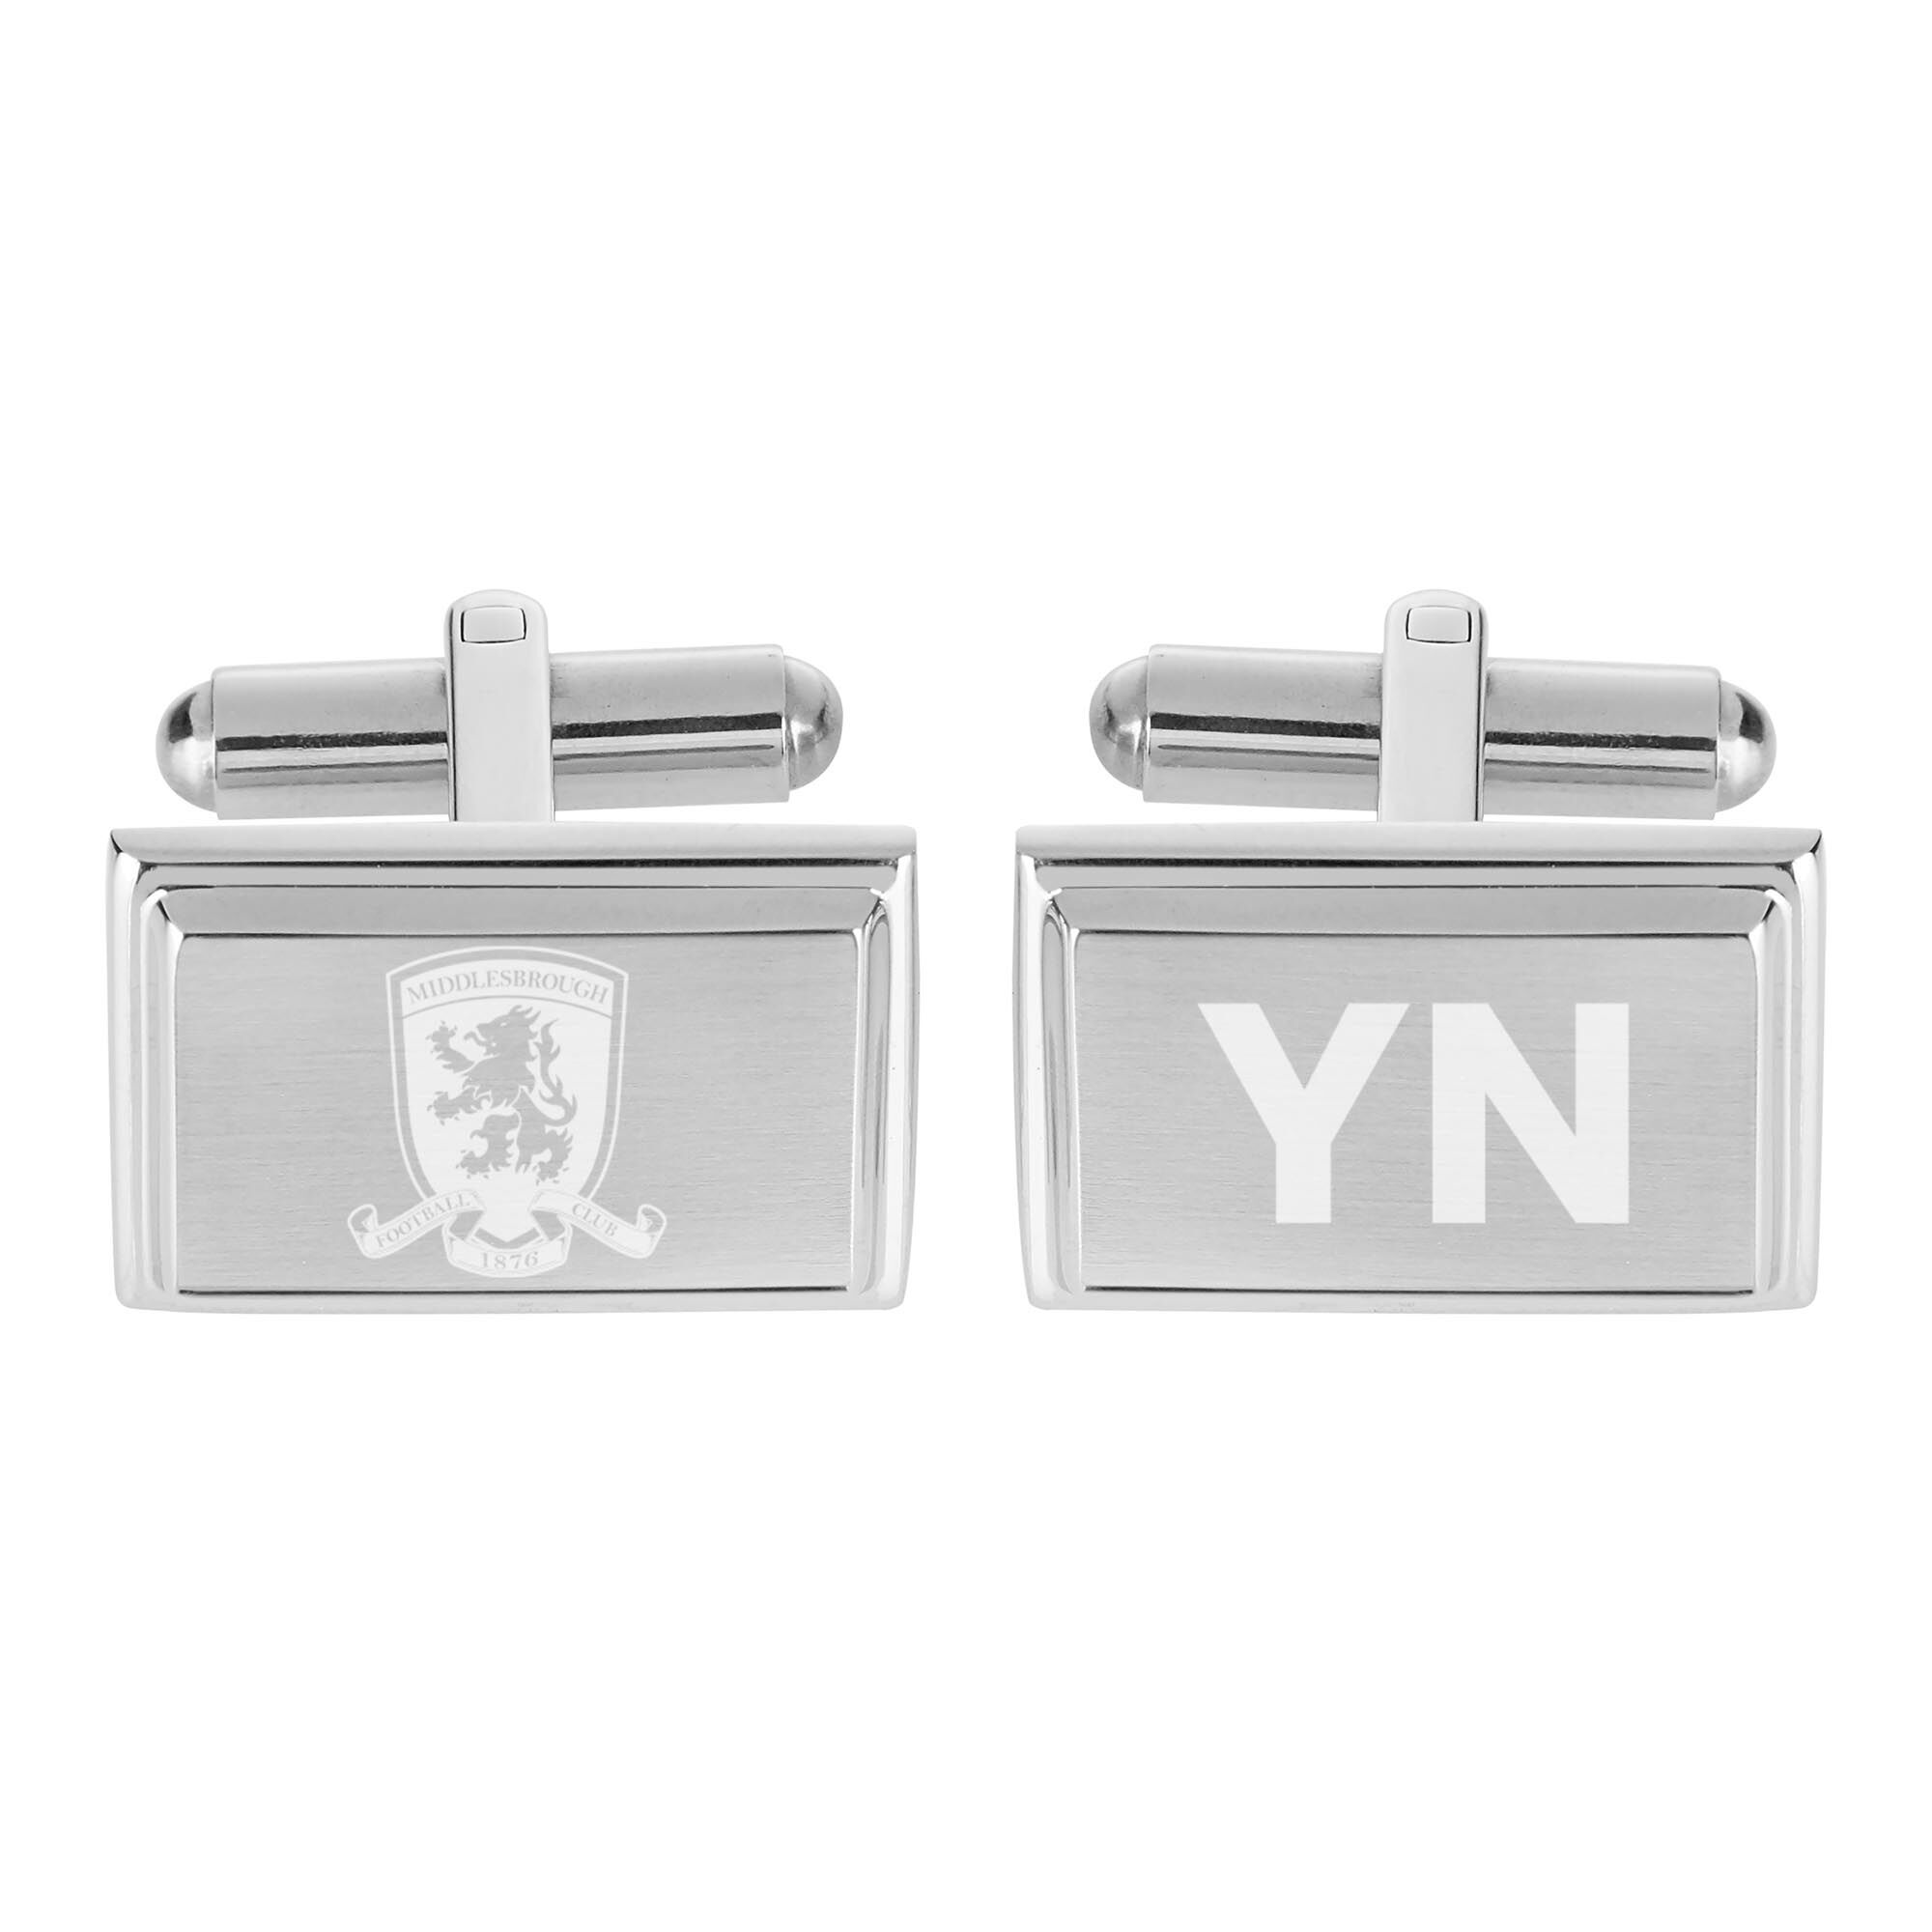 Personalised Middlesbrough FC Crest Cufflinks